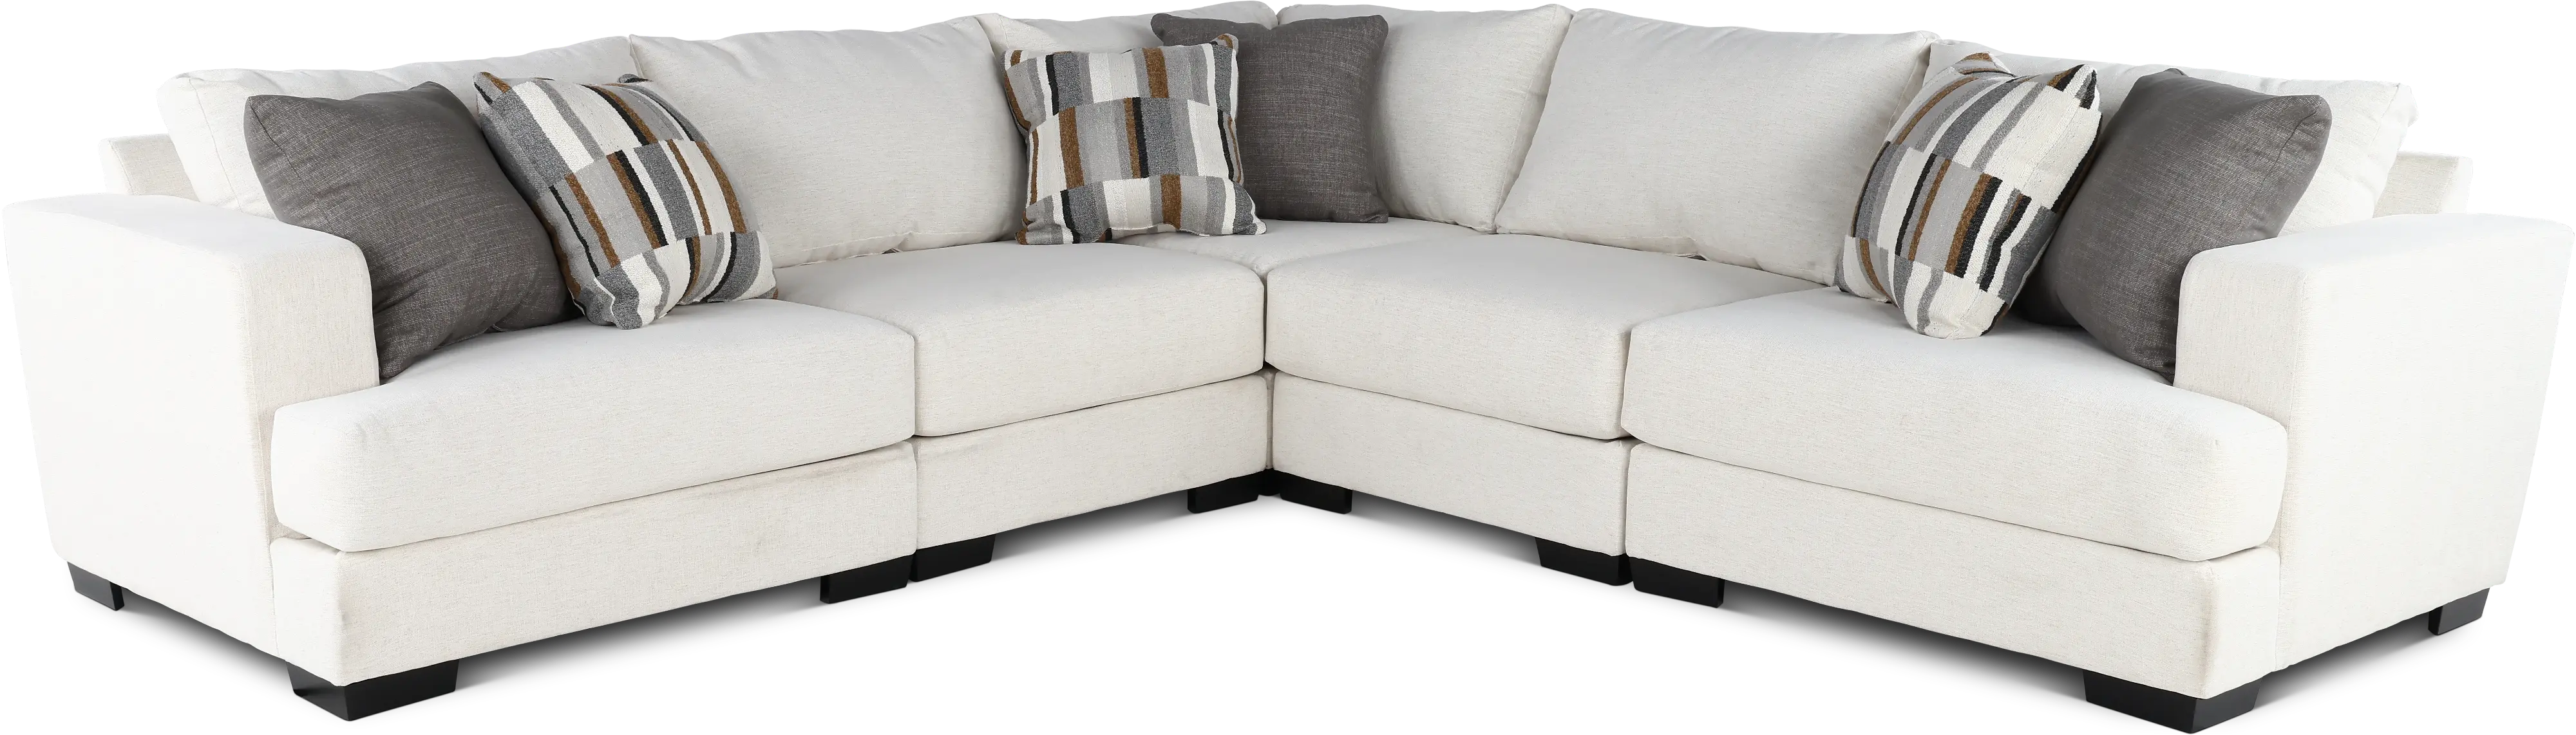 Hansel White 5 Piece Sectional with Crypton Home Fabric